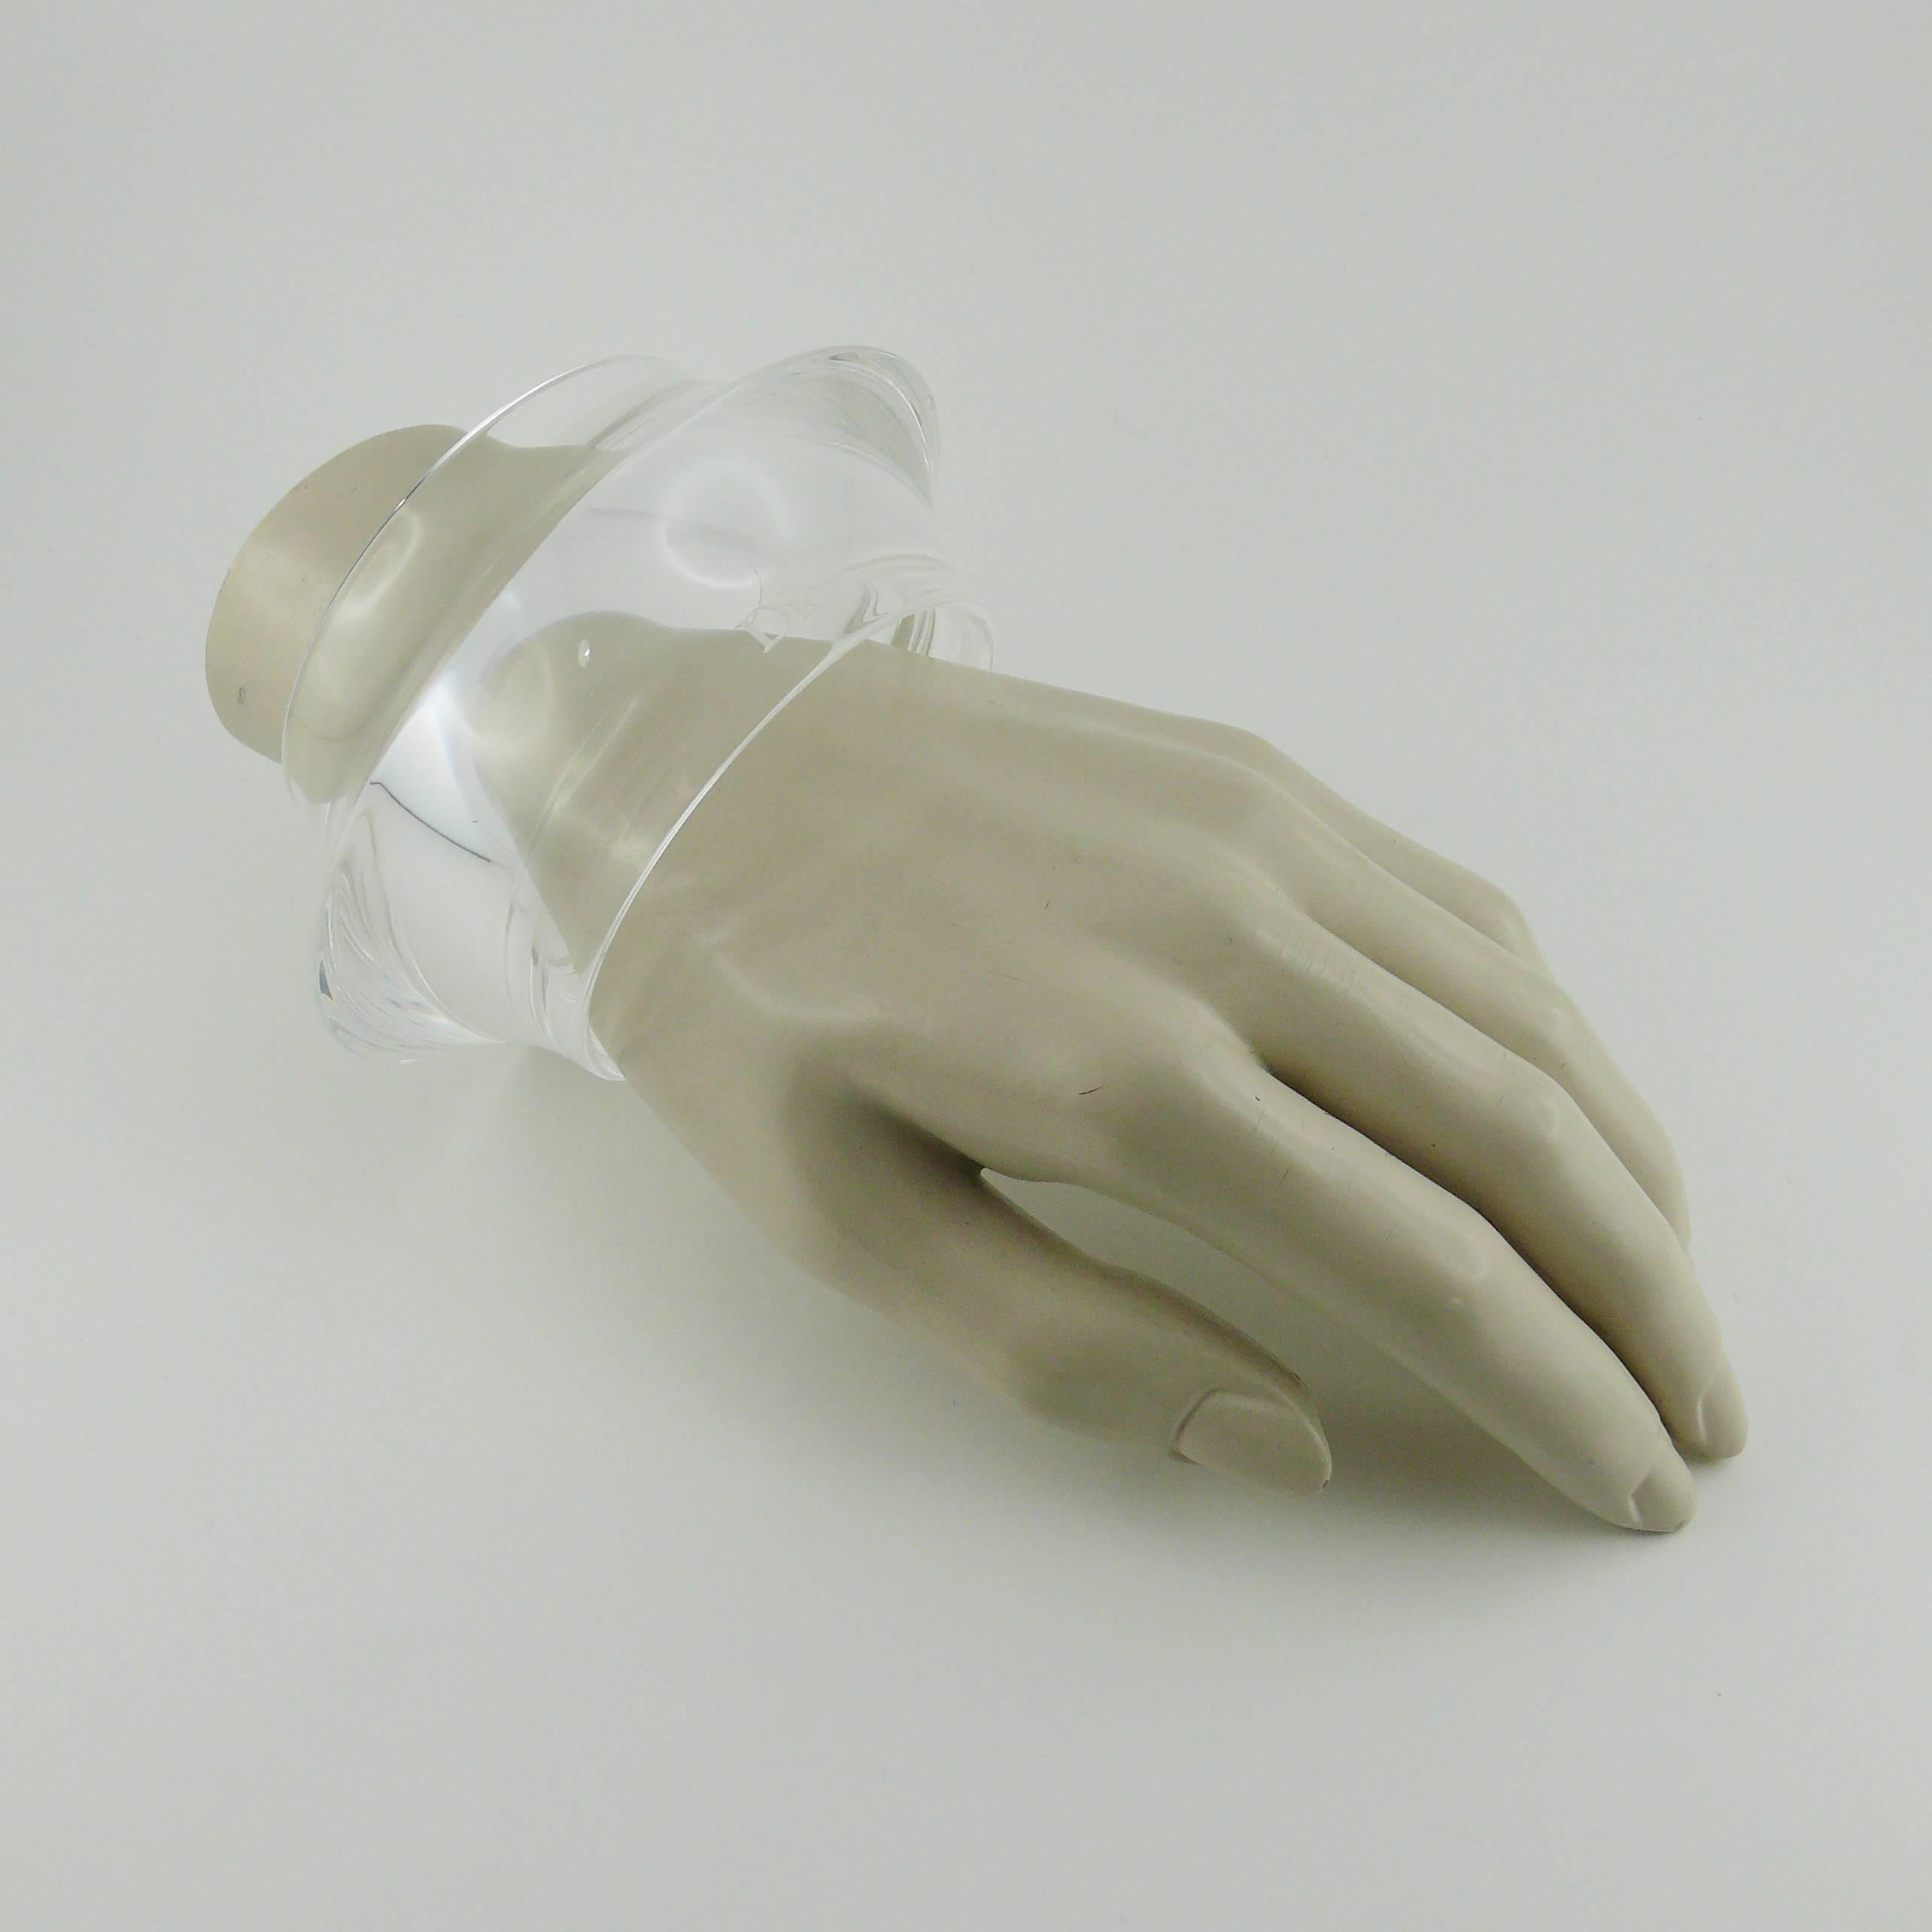 CHRISTIAN DIOR Boutique Space Age chunky clear lucite cuff bracelet.

Marked DIOR.

Indicative measurements : inner circumference approx. 20.42 cm (8.04 inches) / width approx. 4.9 cm (1.93 inches).

JEWELRY CONDITION CHART
- New or never worn :